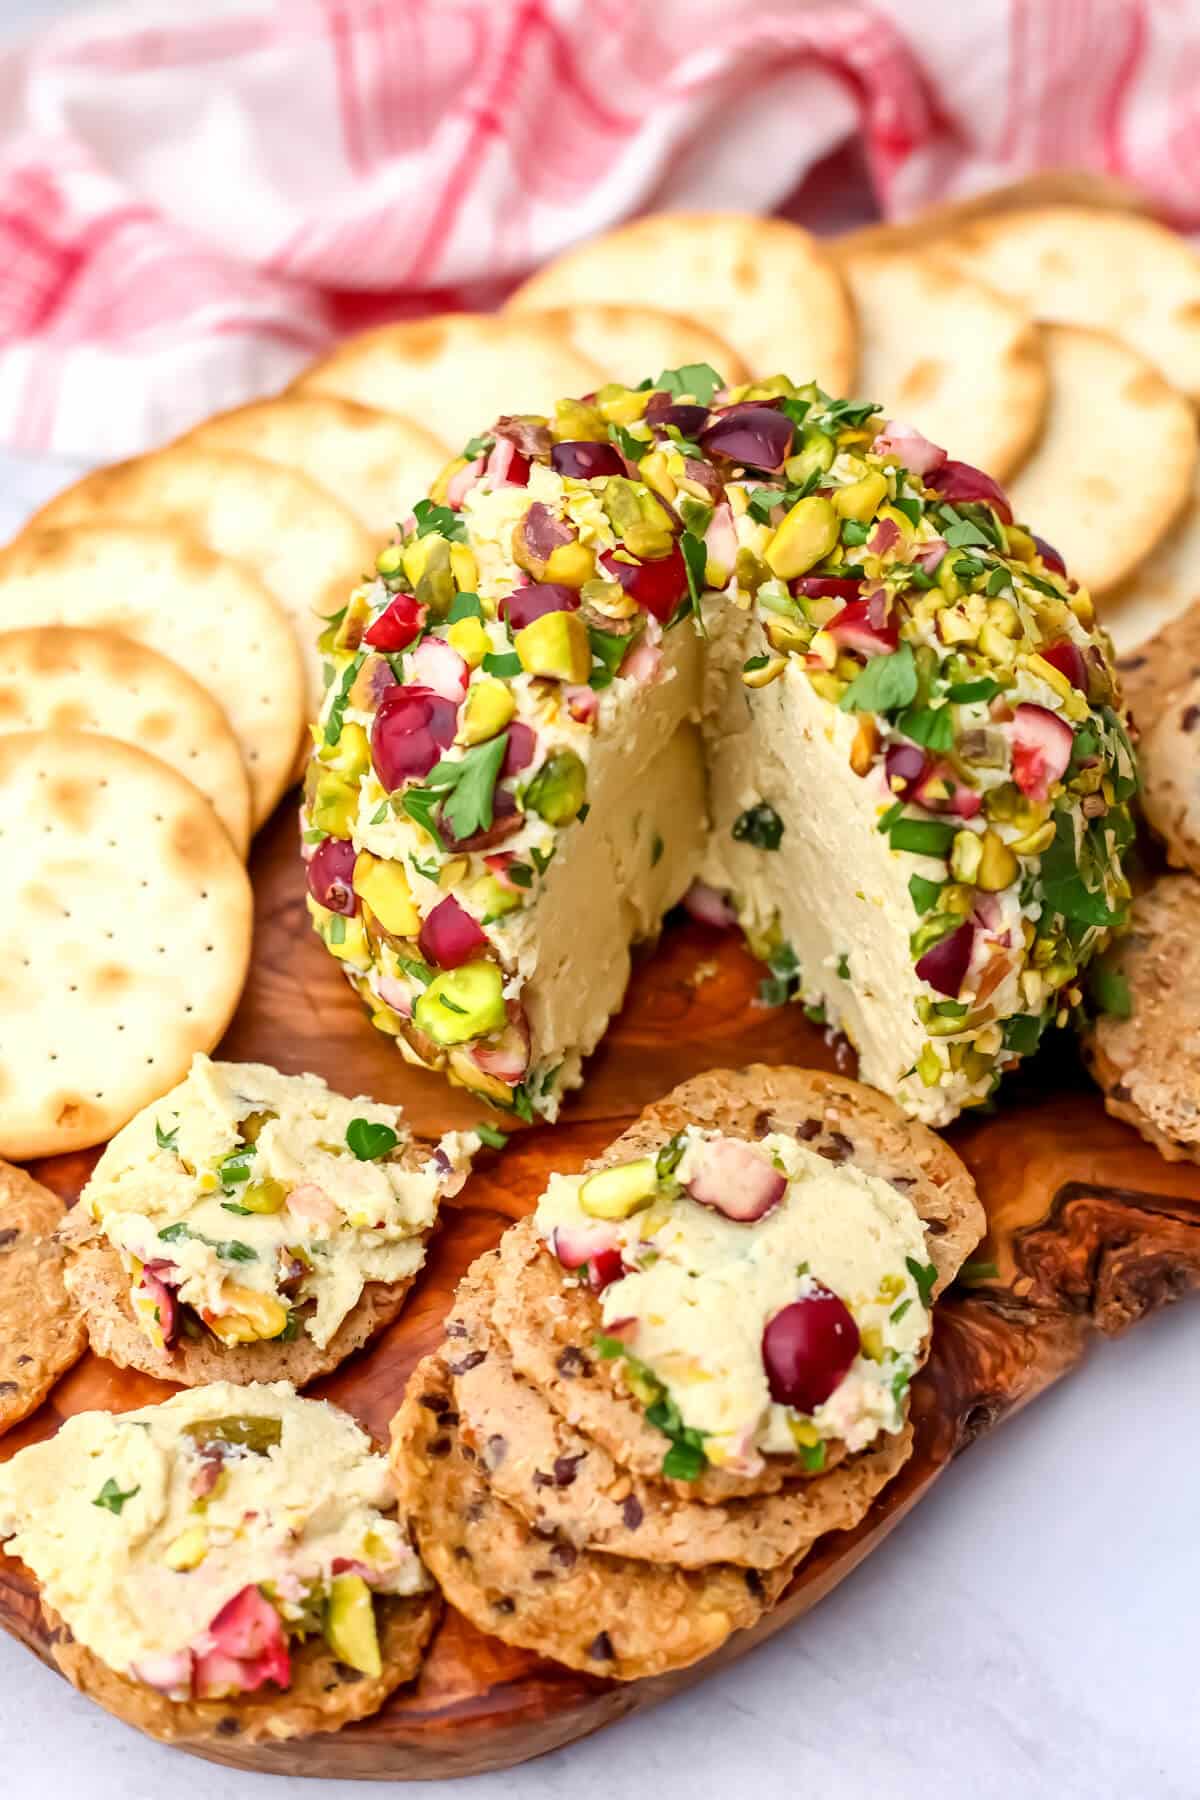 A vegan tofu cheese ball rolled in pistachios and cranberries on a cutting board with crackers.